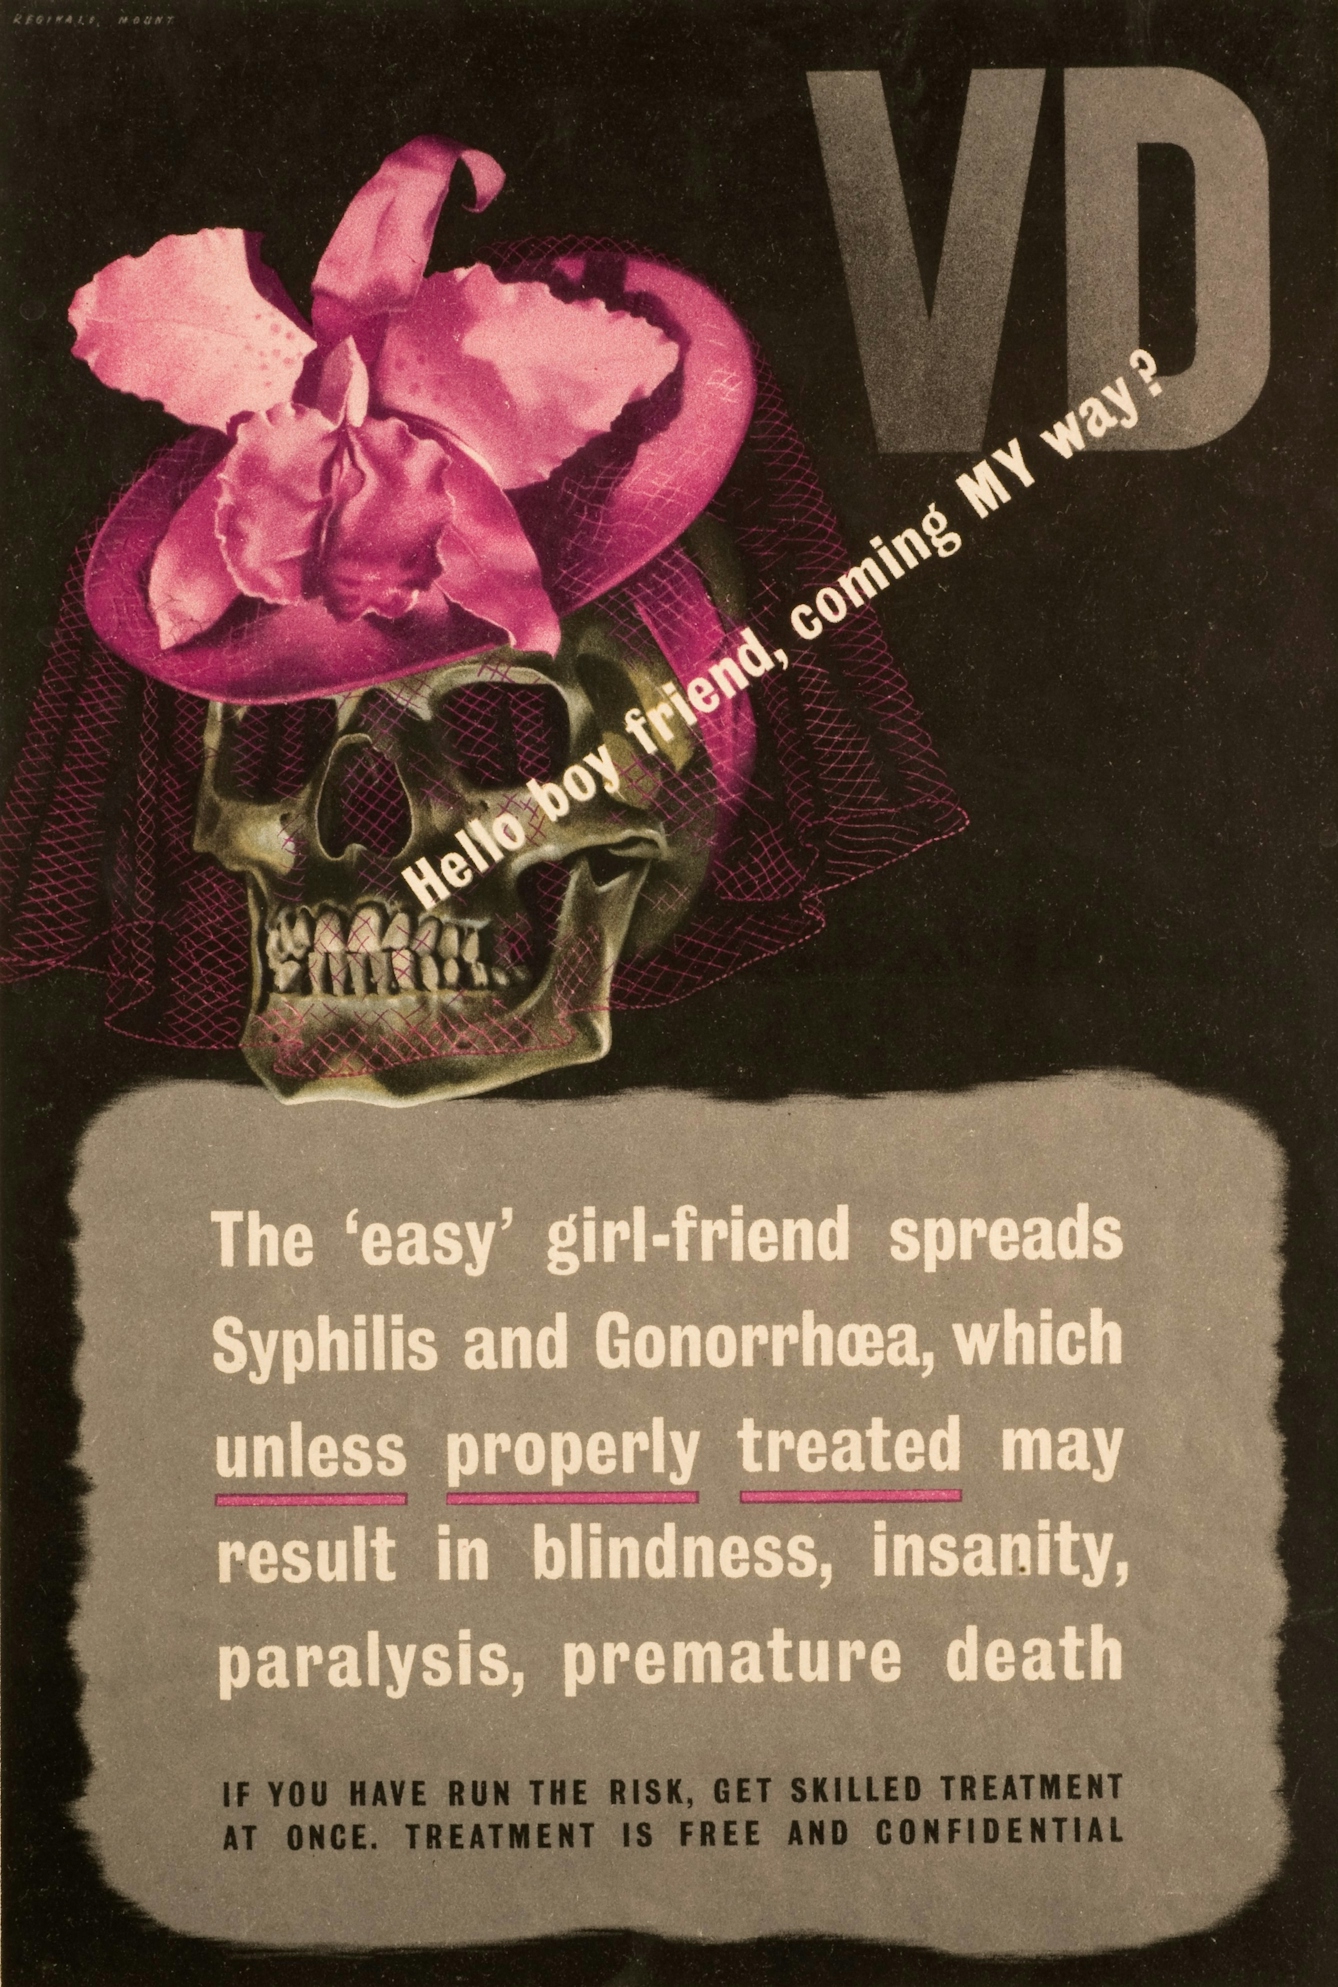 Poster with a skull wearing a pink hat that and lettering that reads "VD: Hello boy friend, coming my way?". The poster warns that easy girl friends spread syphilis and gonorrhoea.